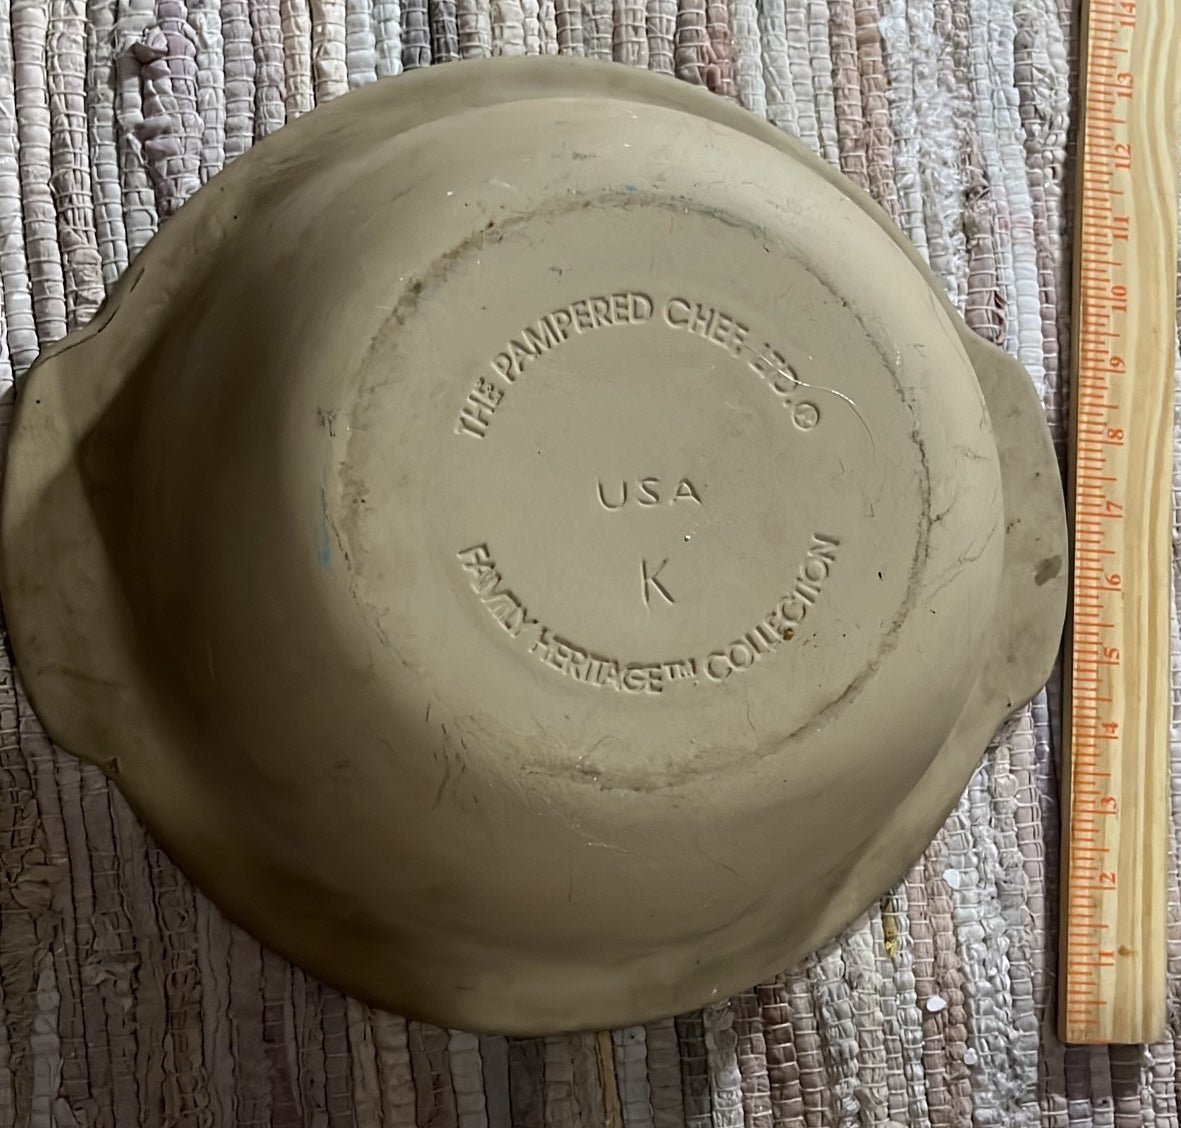 Discontinued Pampered Chef Dome Baker Stoneware RK3ZCqdjL